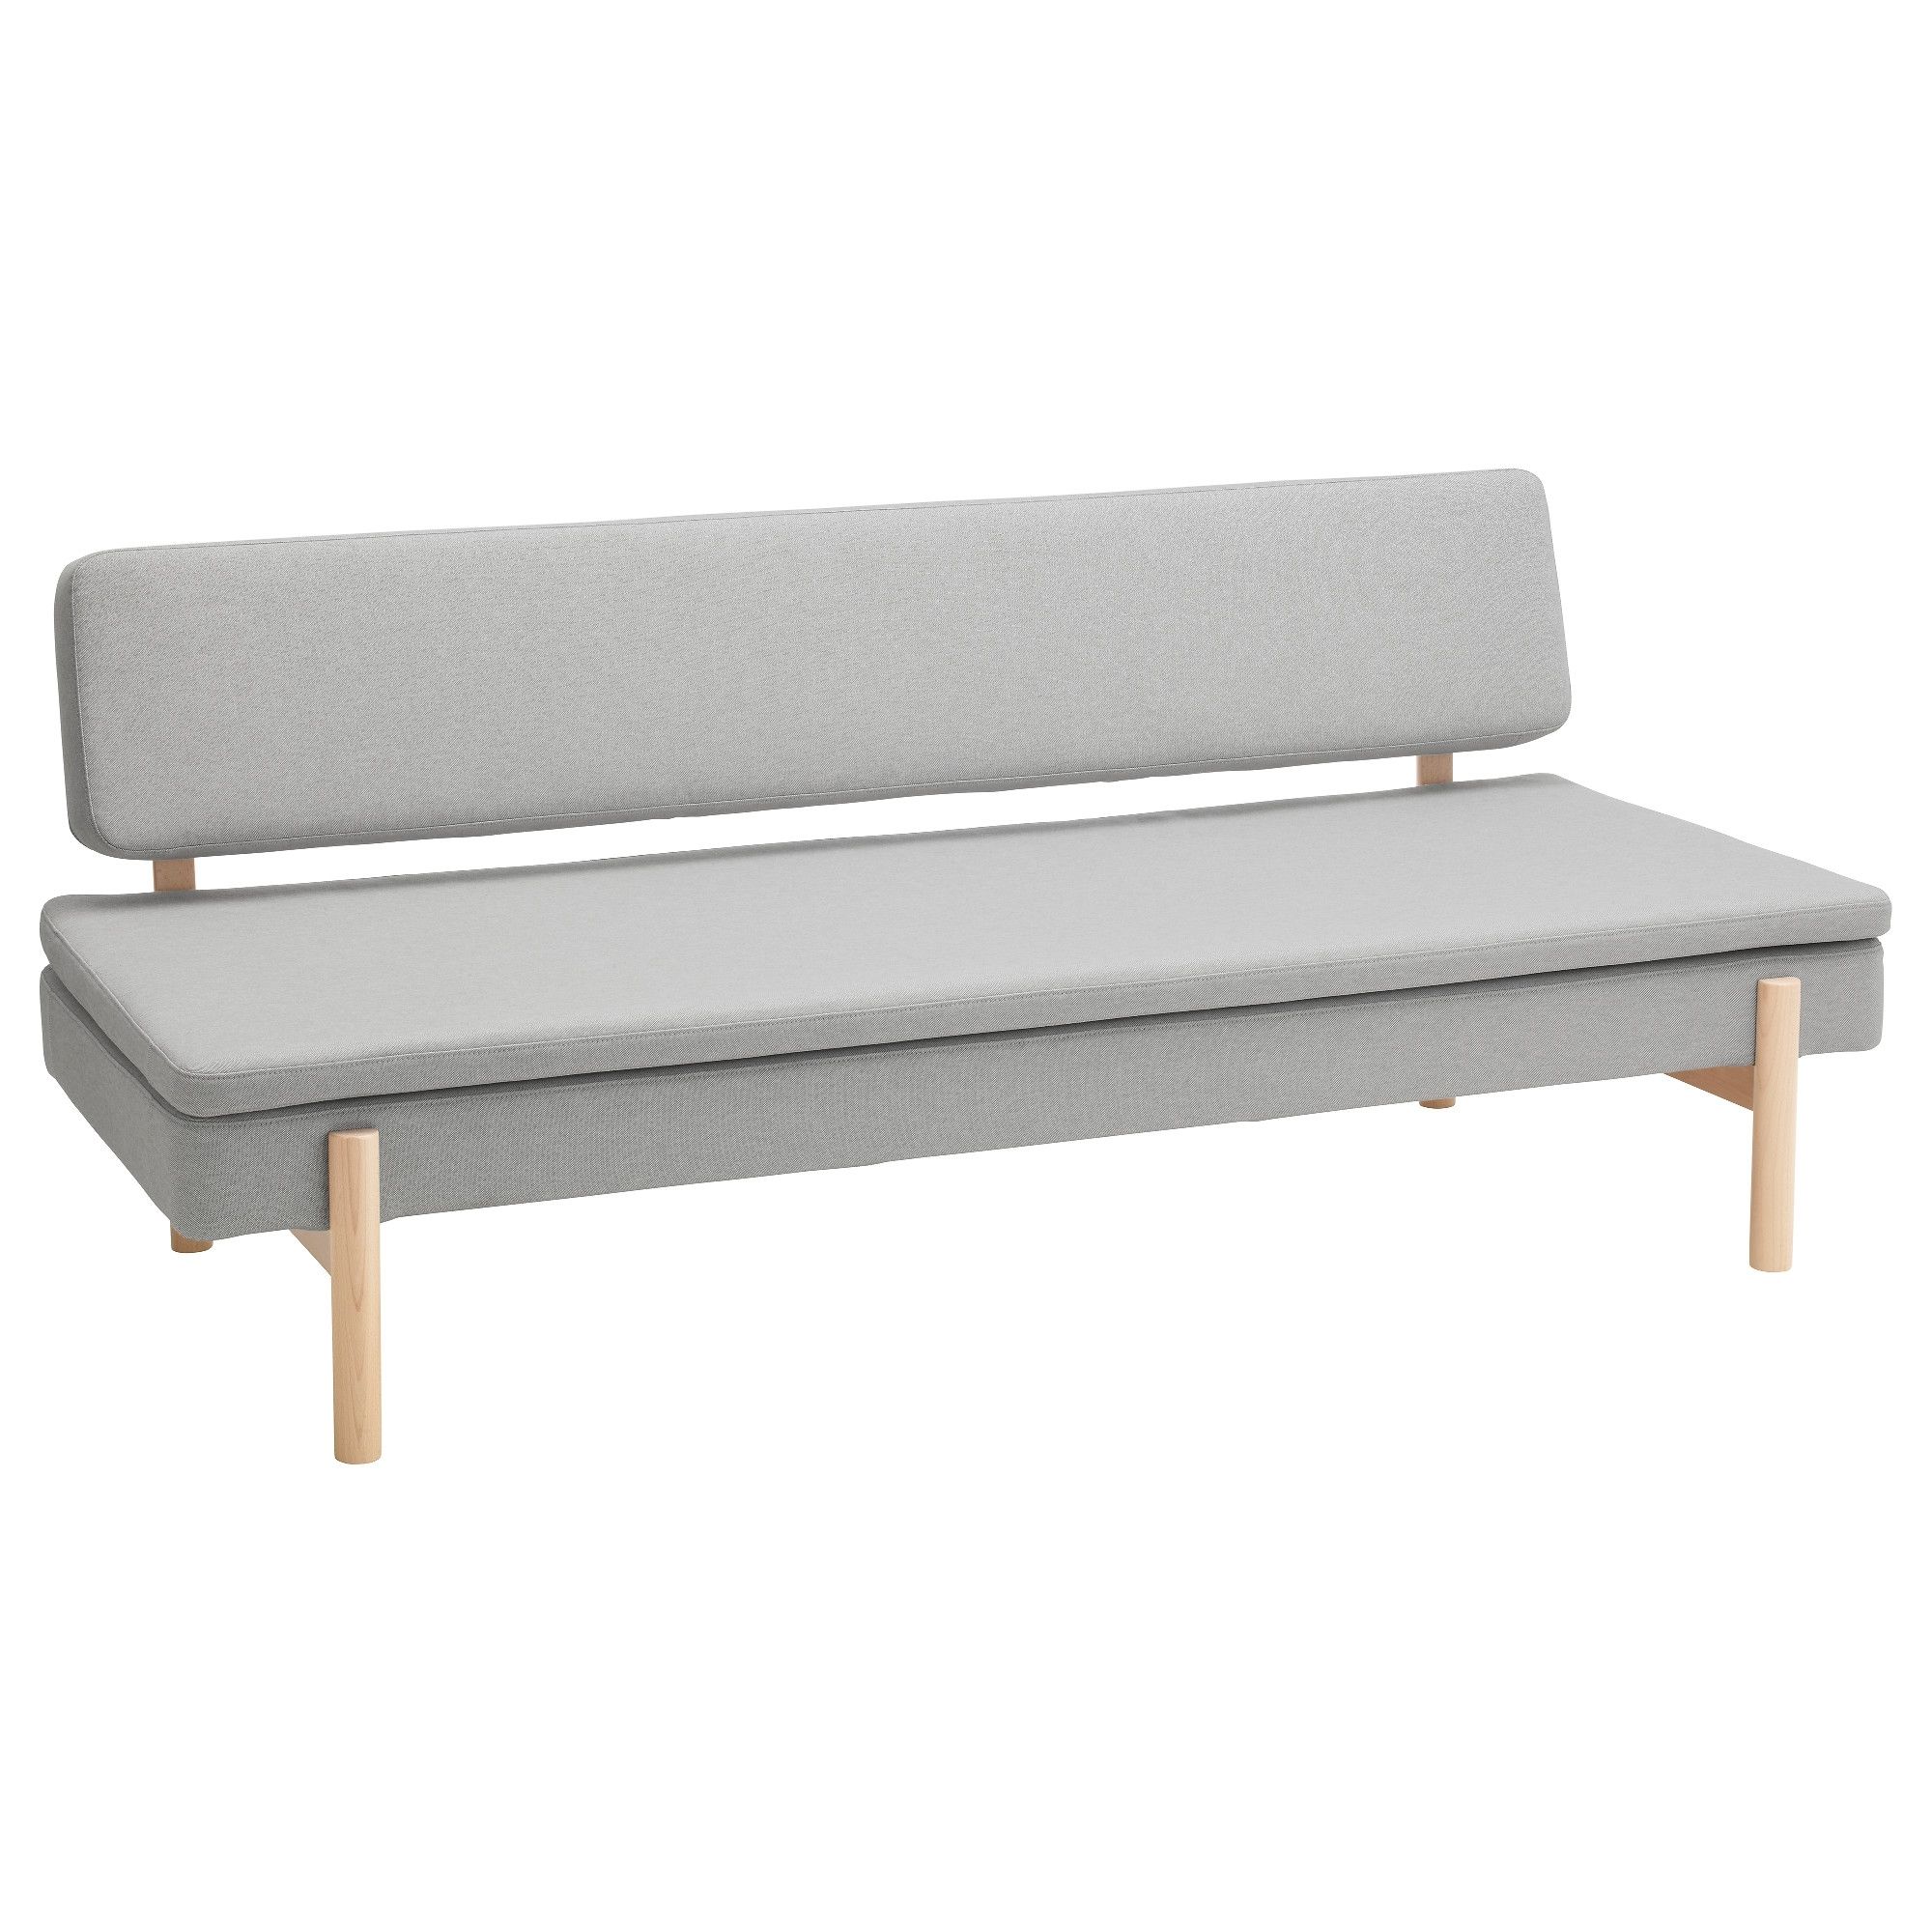 Trendy Ypperlig 3 Seat Sleeper Sofa – Ikea Intended For Ikea Small Sofas (View 5 of 20)